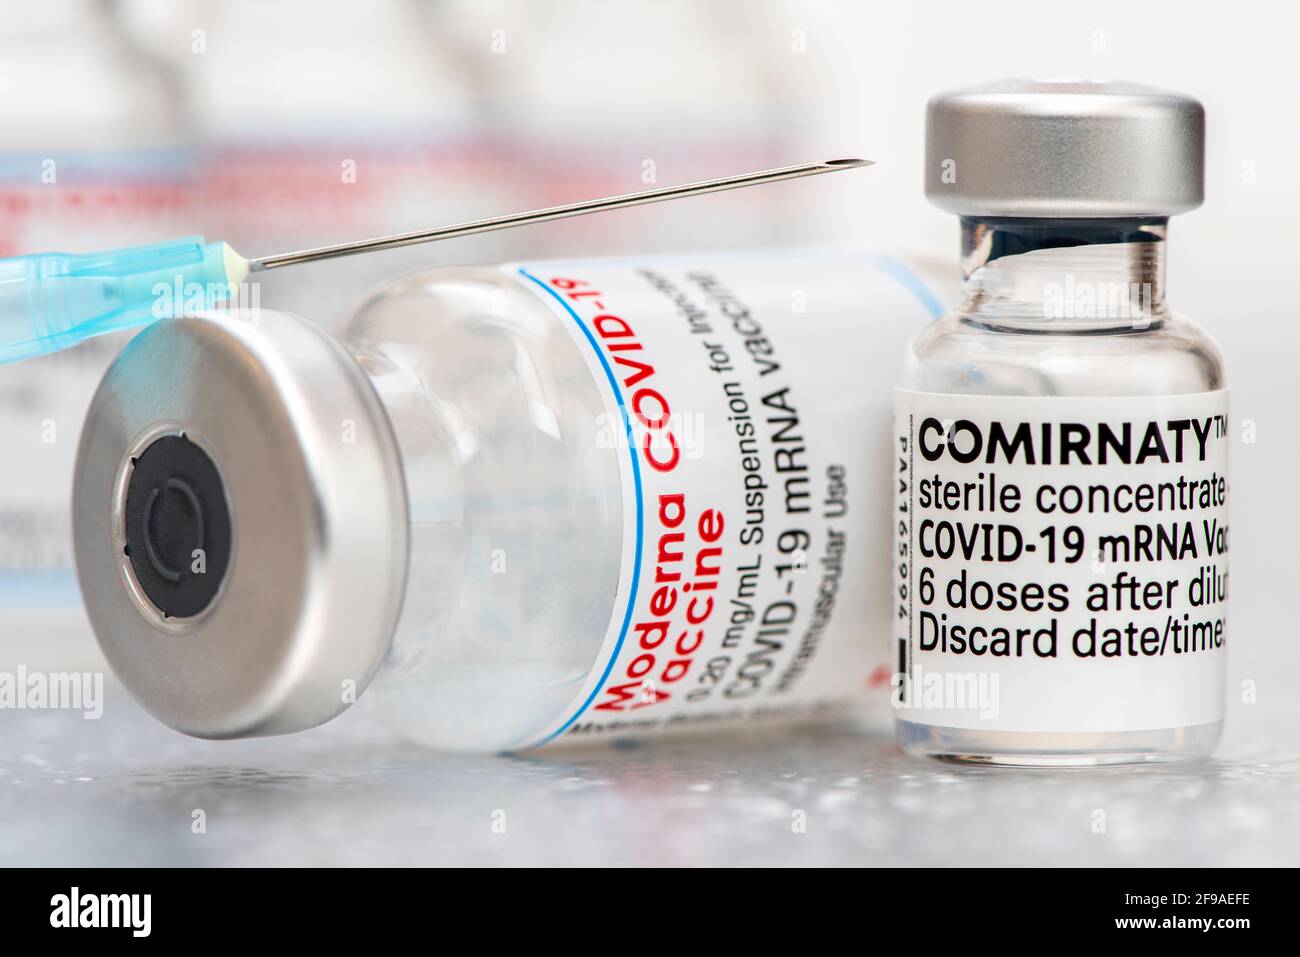 Original COVID-19 vaccination vial from Moderna and Pfizer-BioNTech Stock Photo